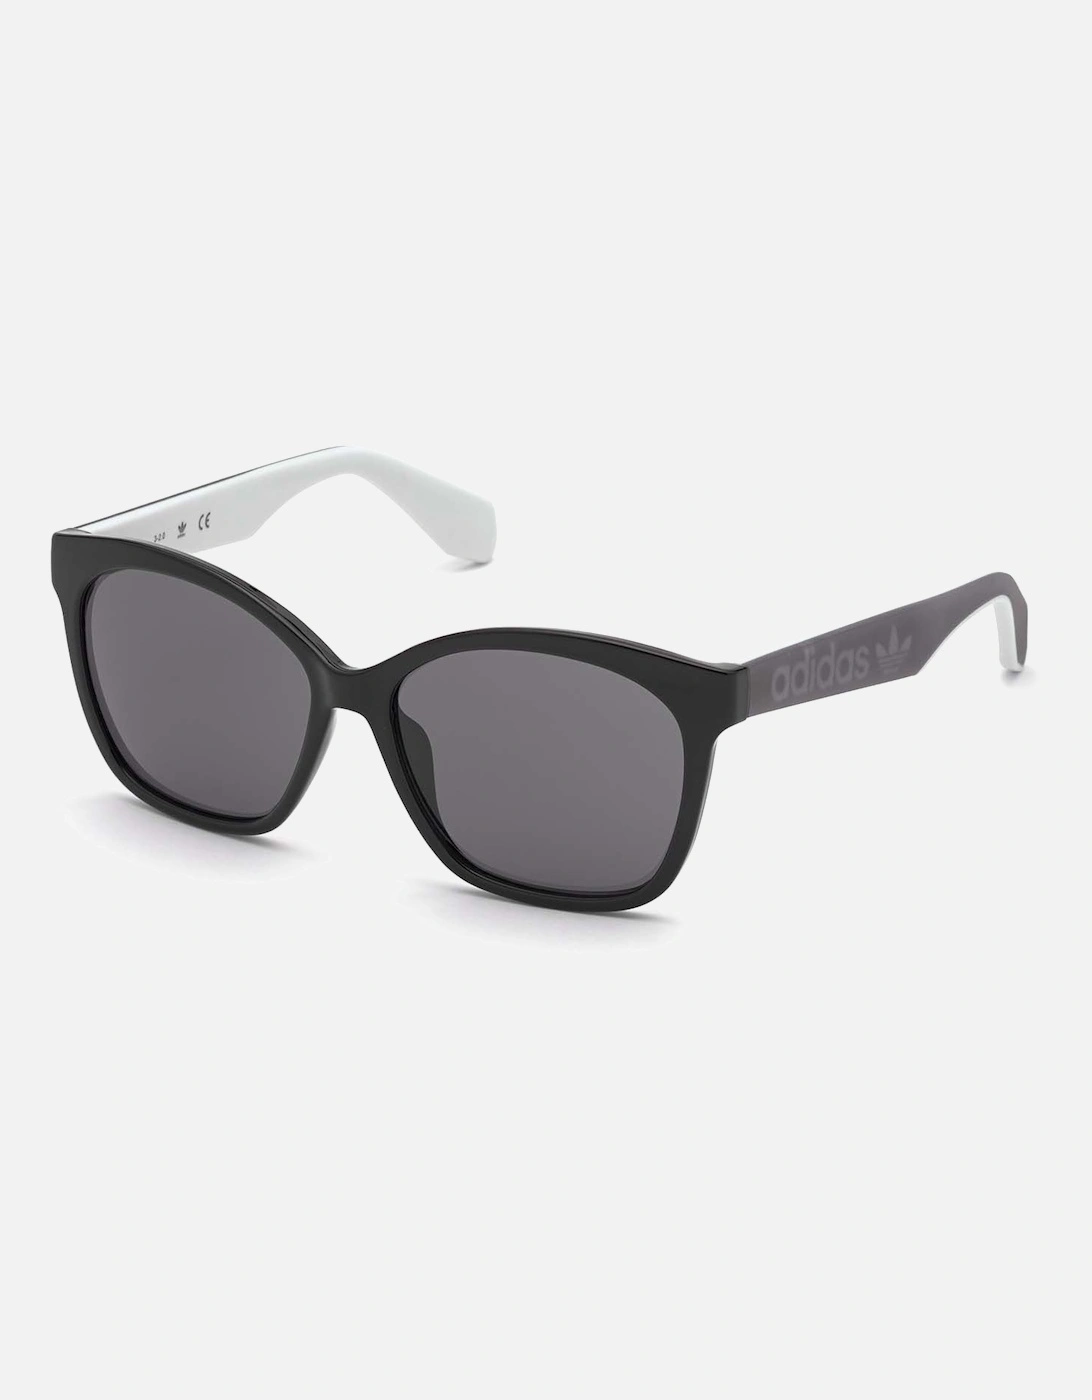 Adidas Originals Women's Womens Butterfly Frame Sunglasses - Black - Size: ONE size